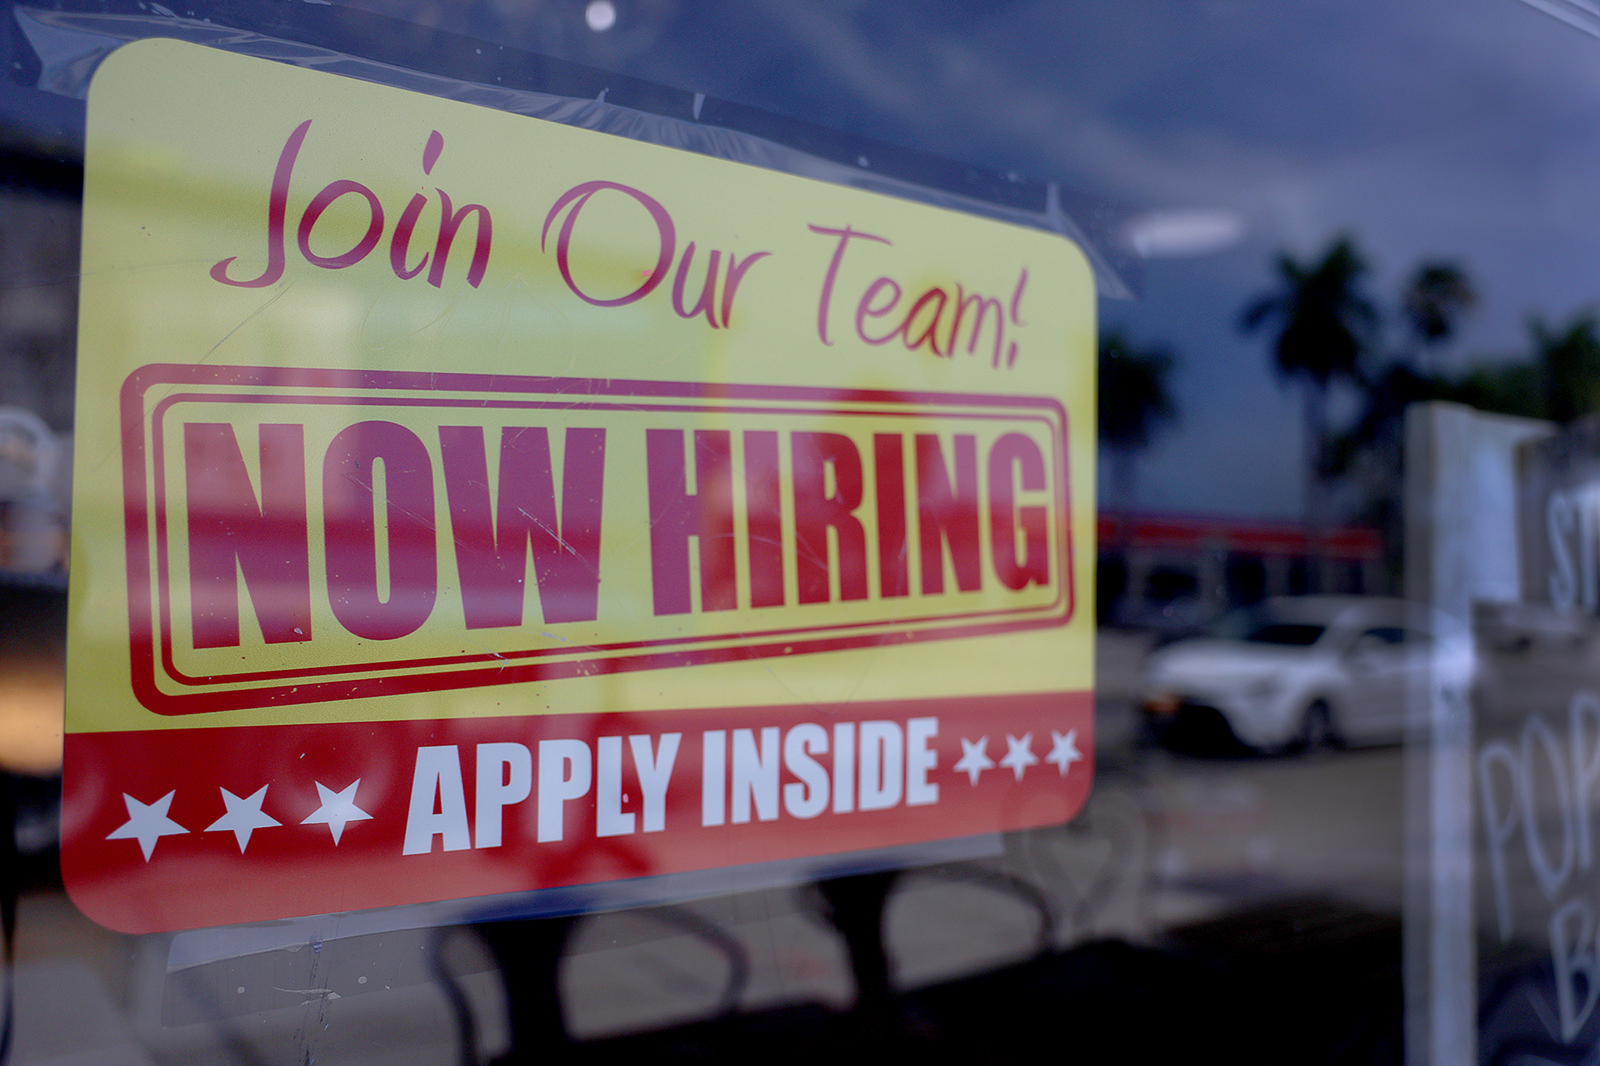 A 'Now Hiring' sign is seen posted in the window of a restaurant looking to hire workers on May 5 in Miami, Florida.